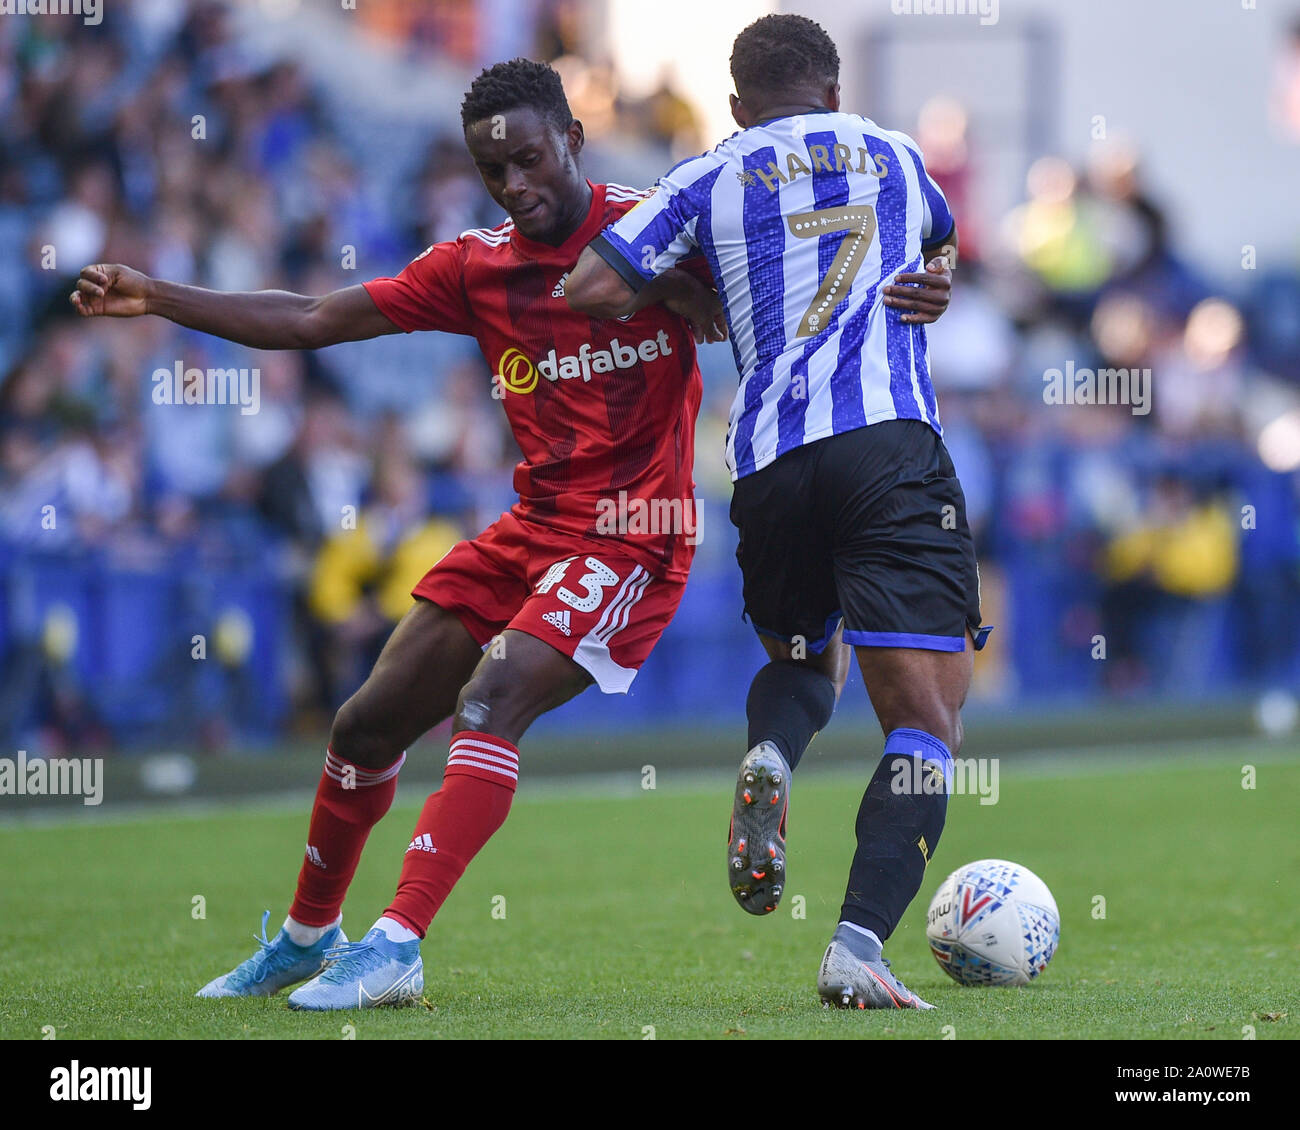 21st September 2019 , Hillsborough, Sheffield, England; Sky Bet Championship, Sheffield Wednesday vs Fulham : Credit: Dean Williams/News Images,Steven Sessegnon (43) of Fulham stops Kadeem Harris (7) of Sheffield Wednesday .  English Football League images are subject to DataCo Licence Stock Photo